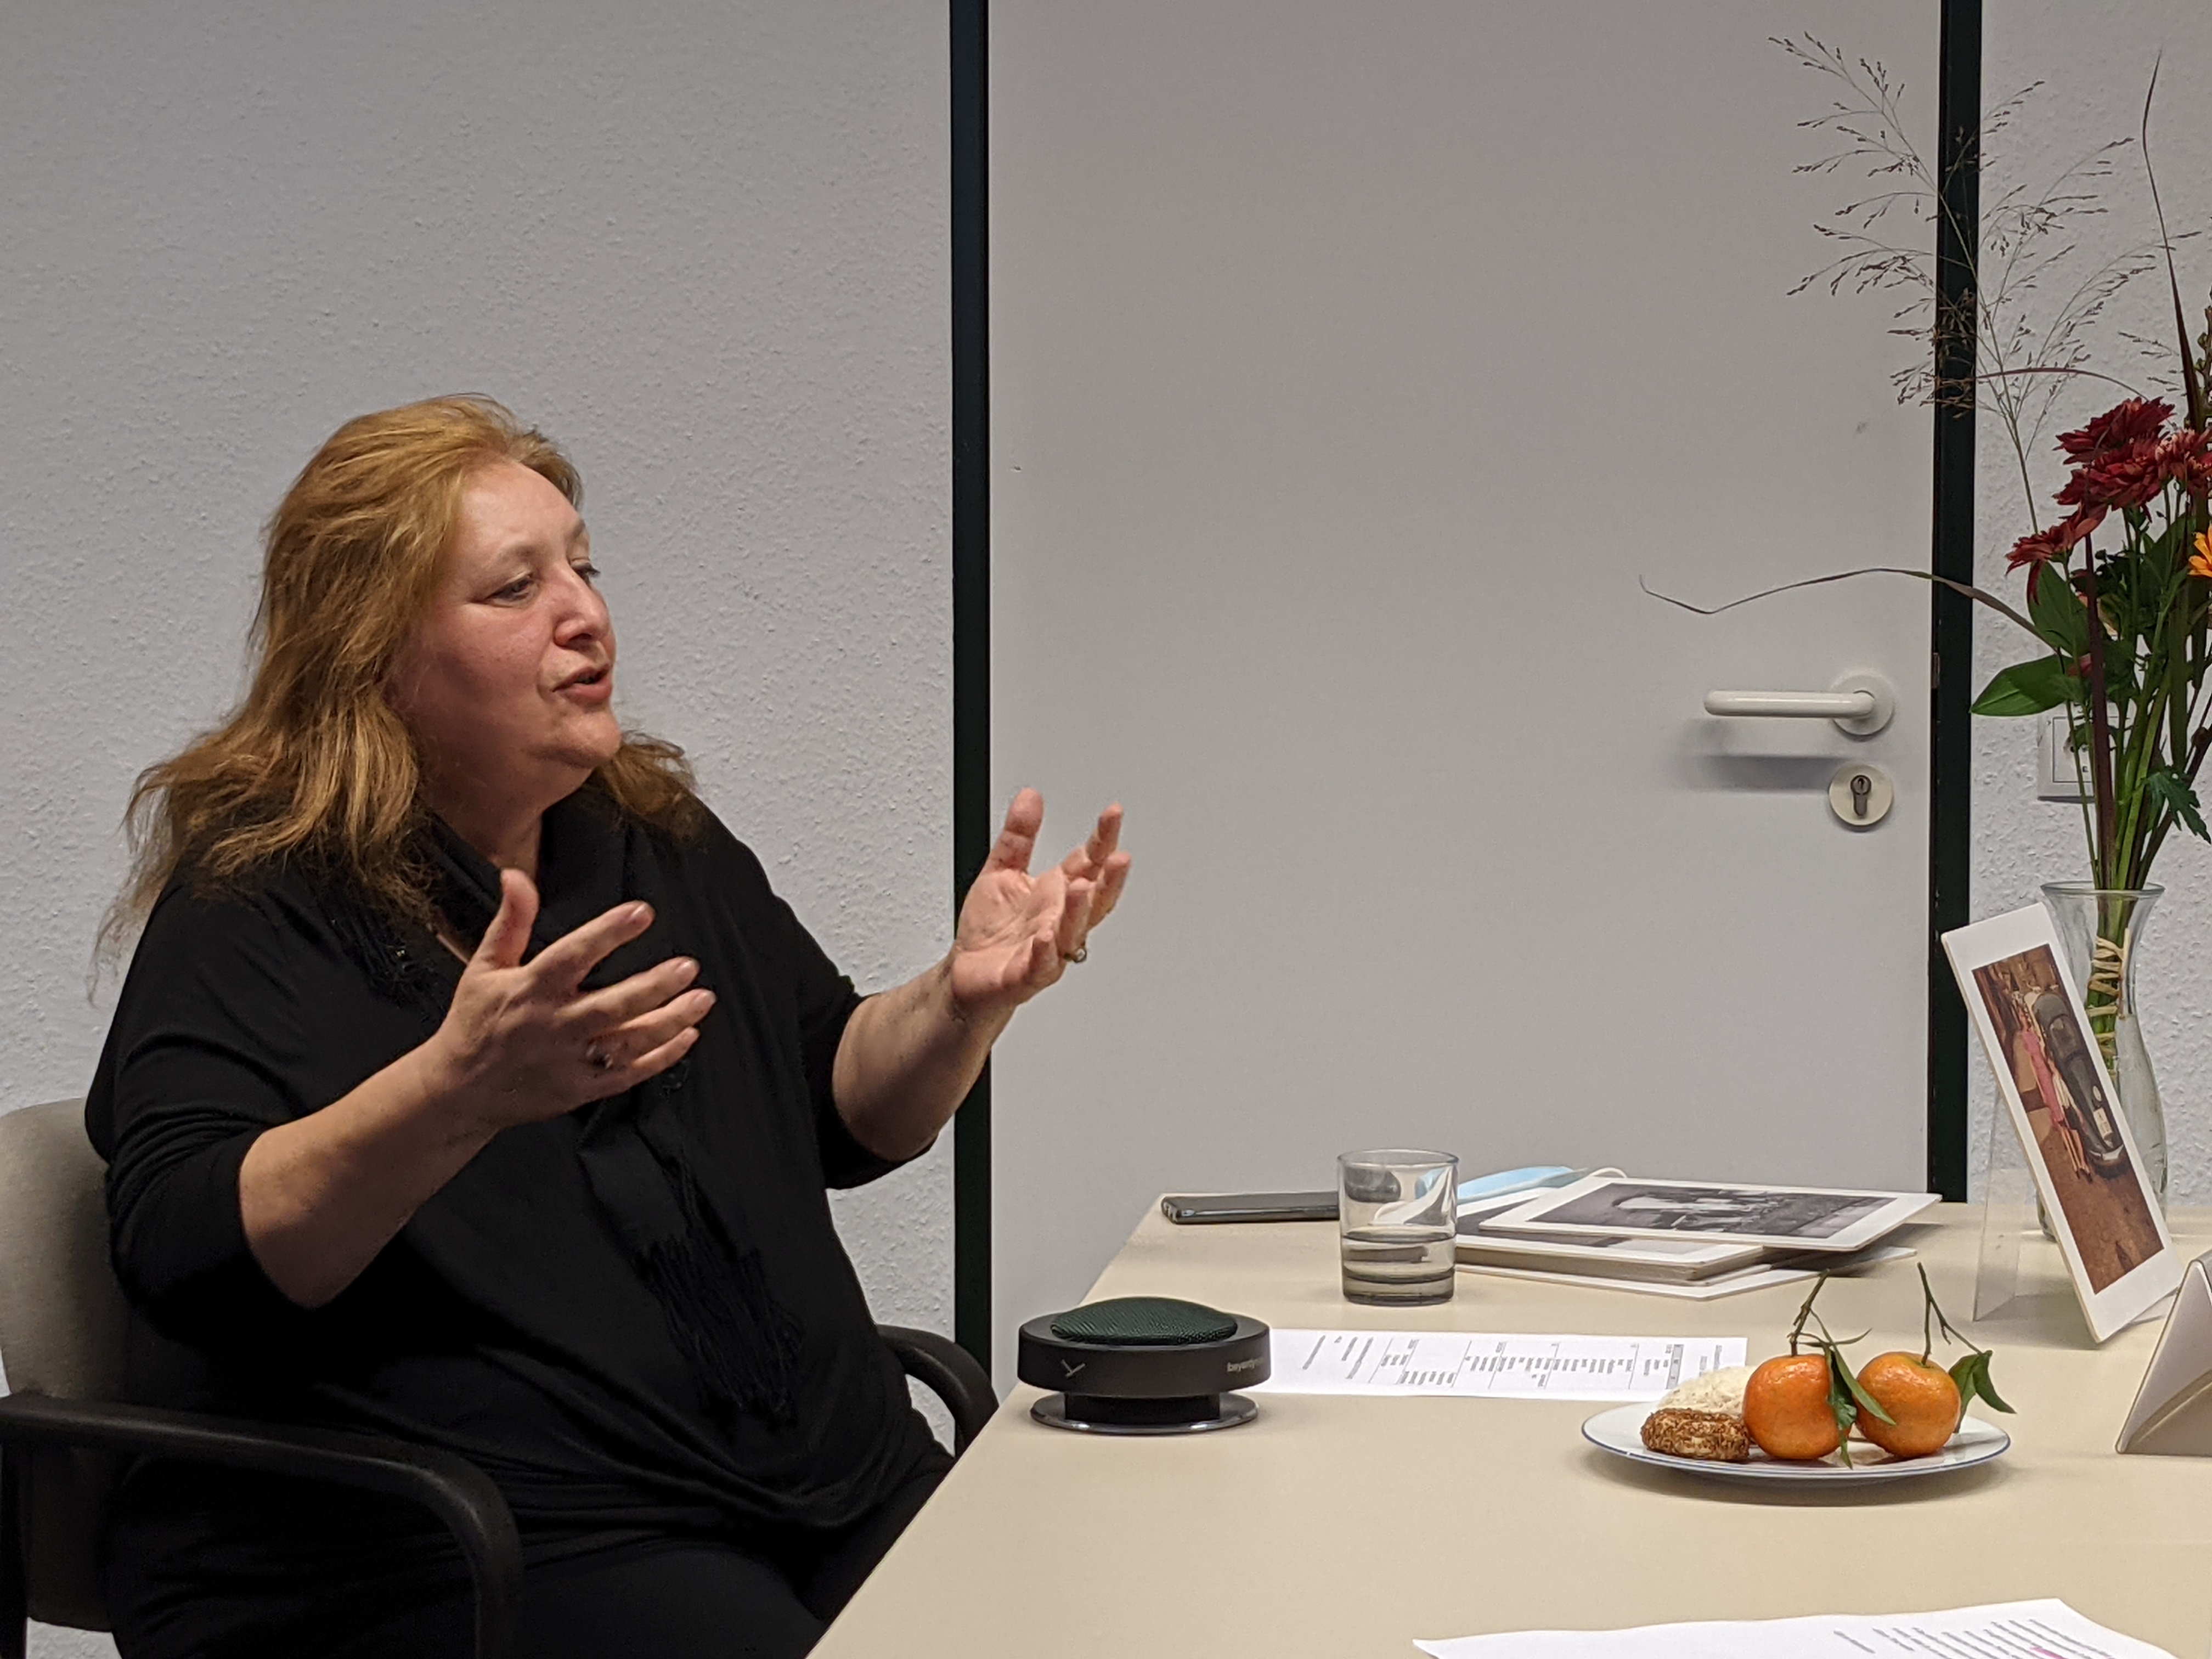 The contemporary witness Rosa Spitaleri during our online conversation. Photo: DOMiD Archive, Cologne